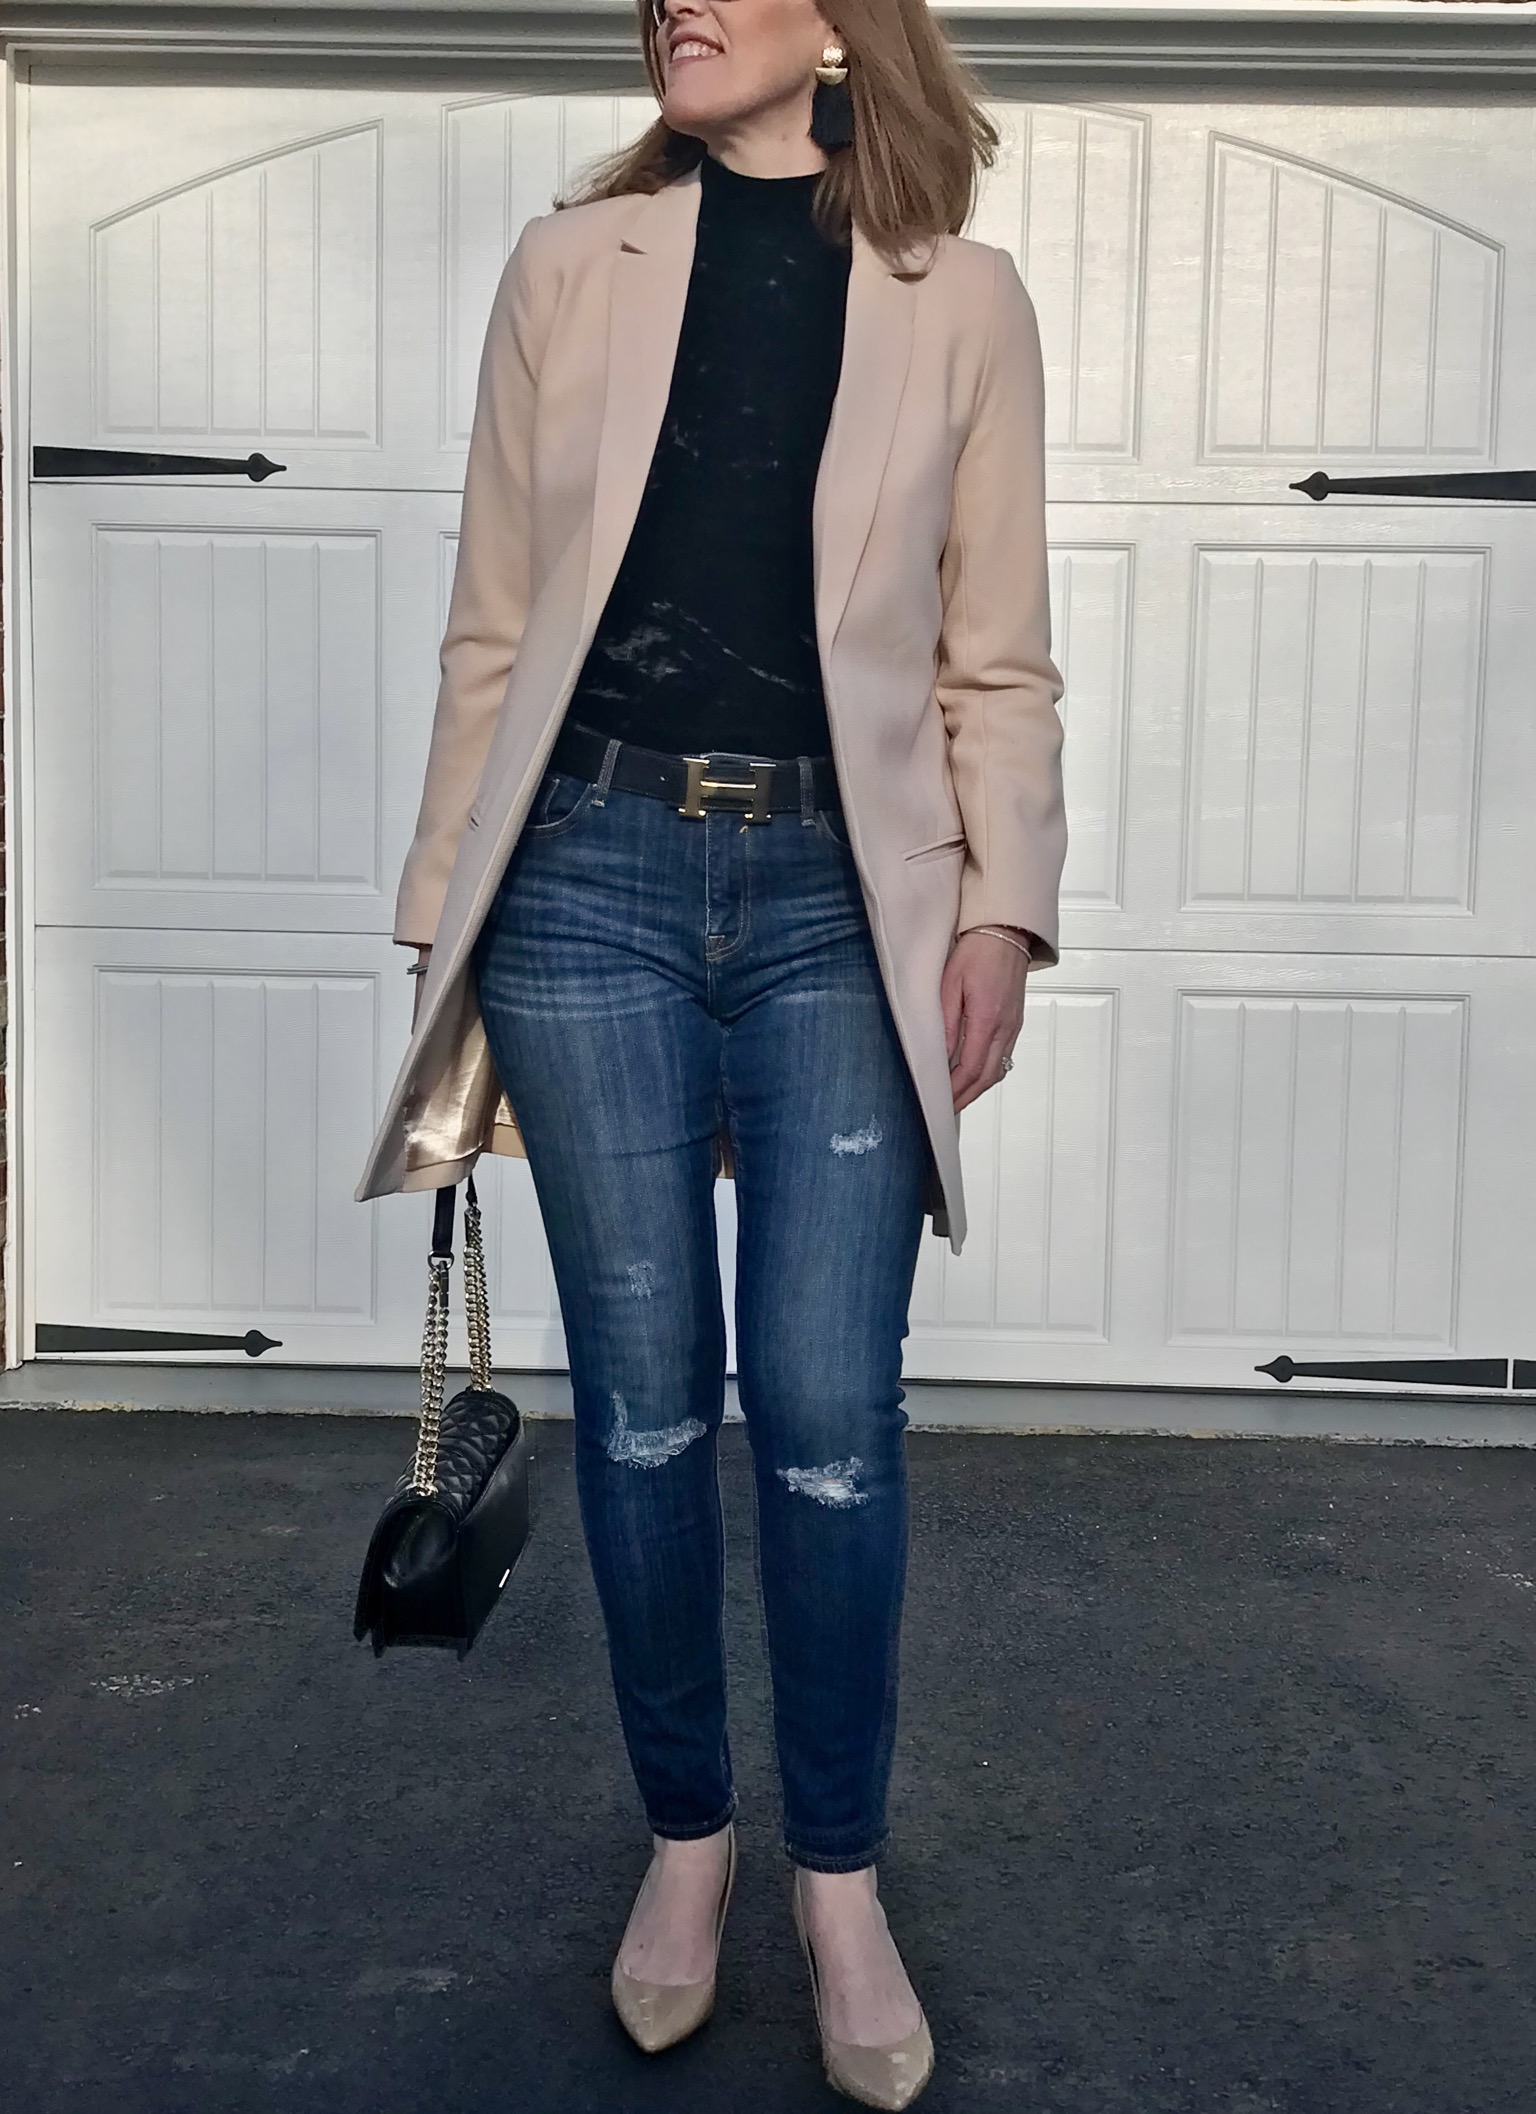 Valentine's Day in France & French Chic Date Outfit + a Link-Up!